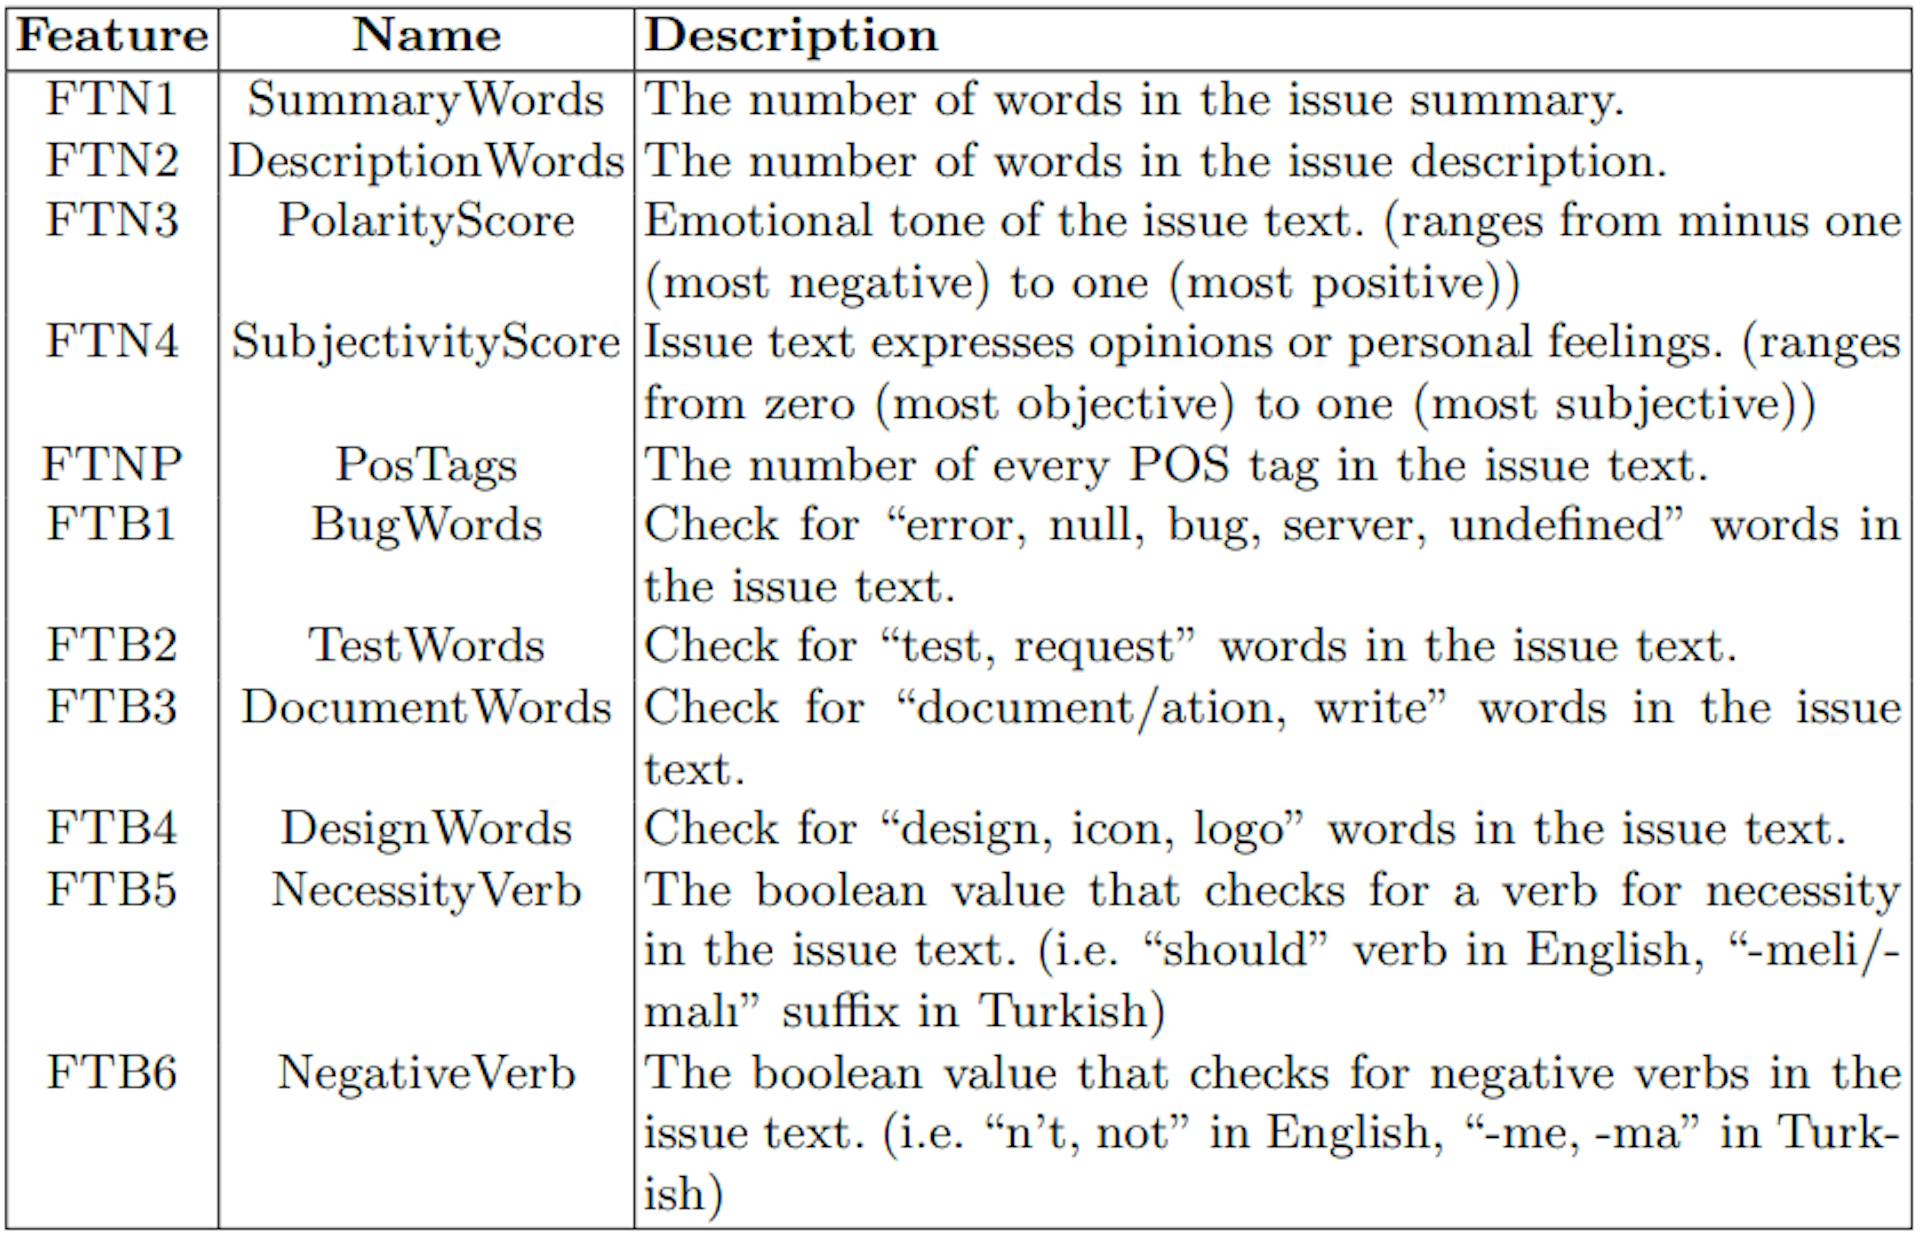 Table 4: Features extracted from issue texts.